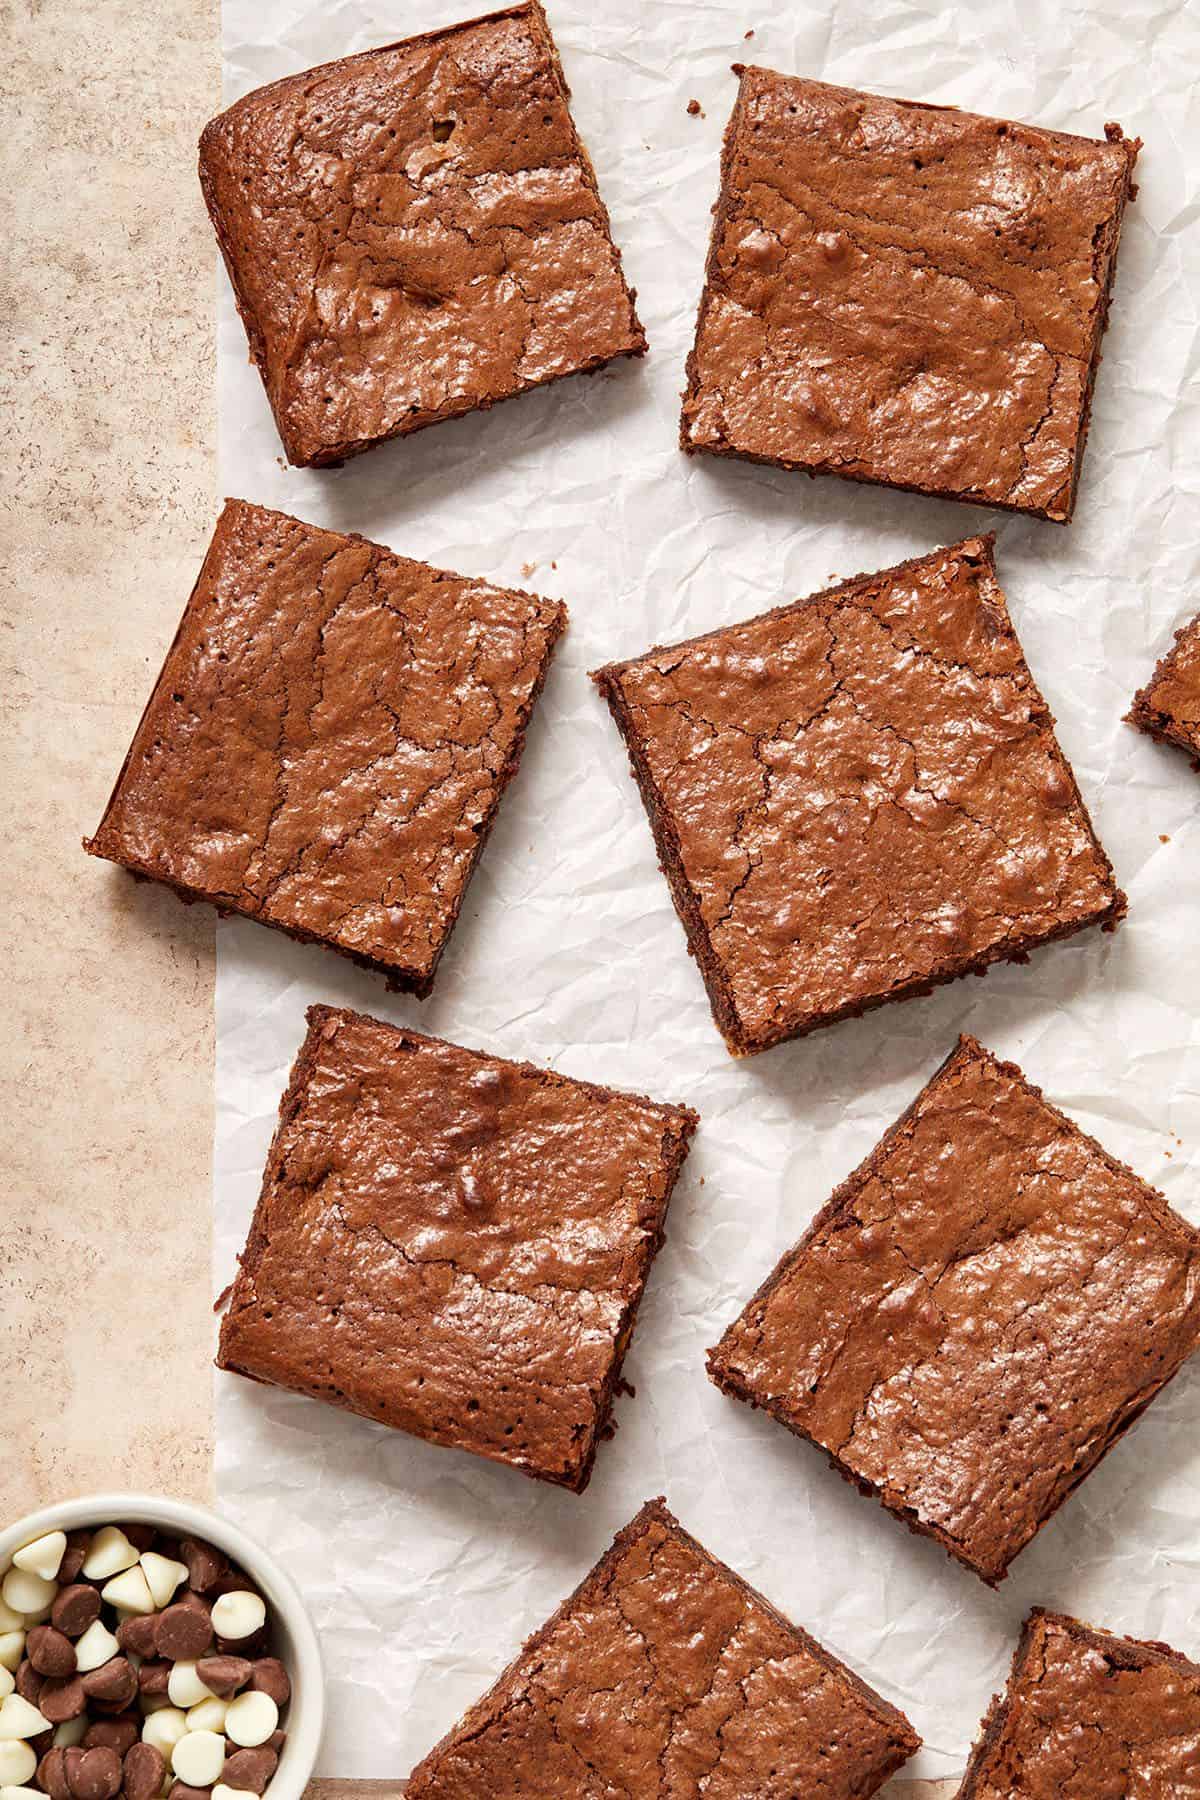 Overhead shot of squares of brownies on parchment paper, with a dish of chocolate chips in the bottom left corner.